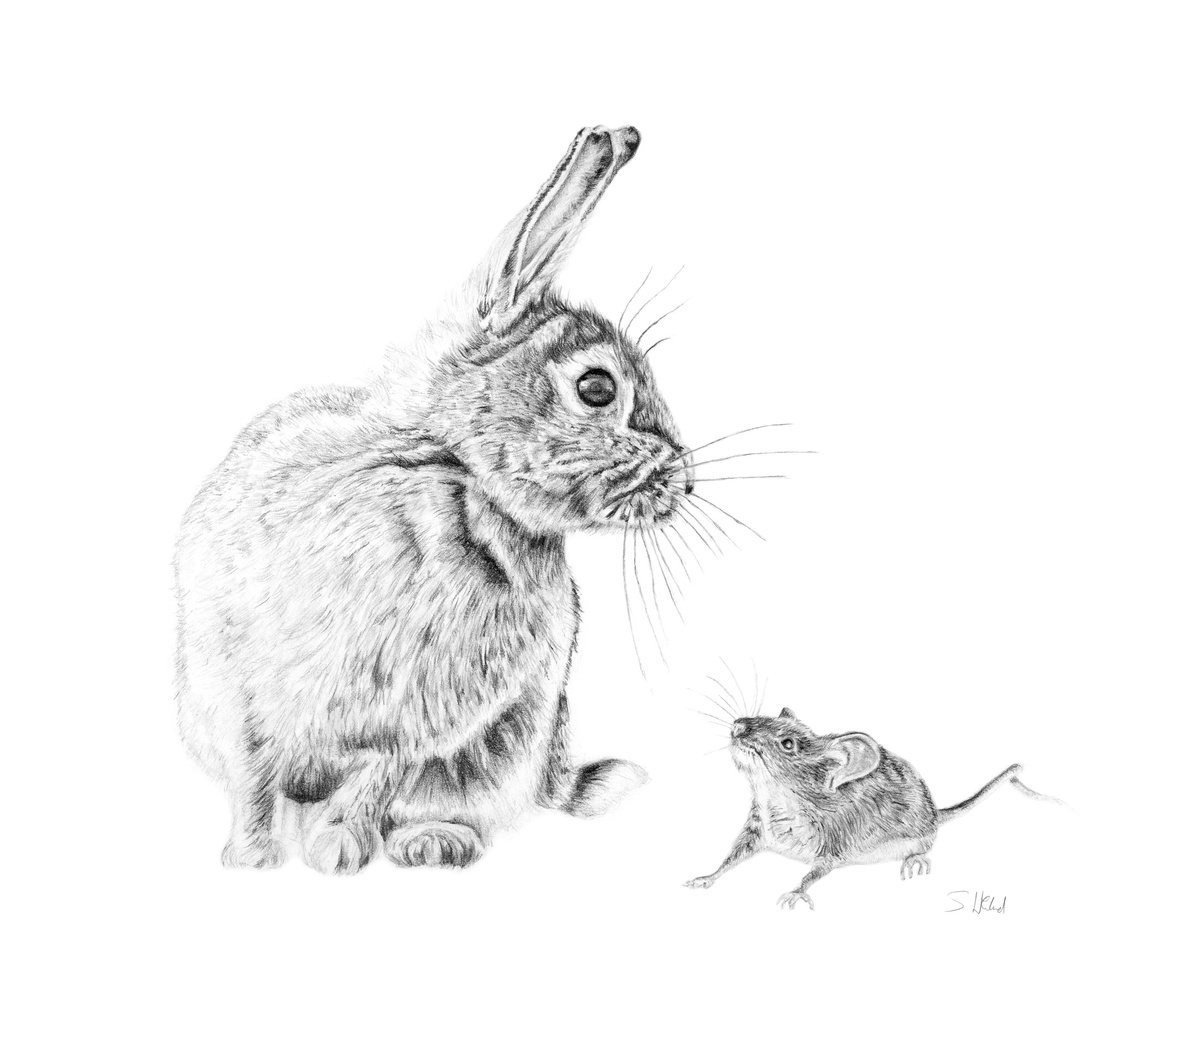 Greenwich Rabbit and Mouse by Susannah Weiland